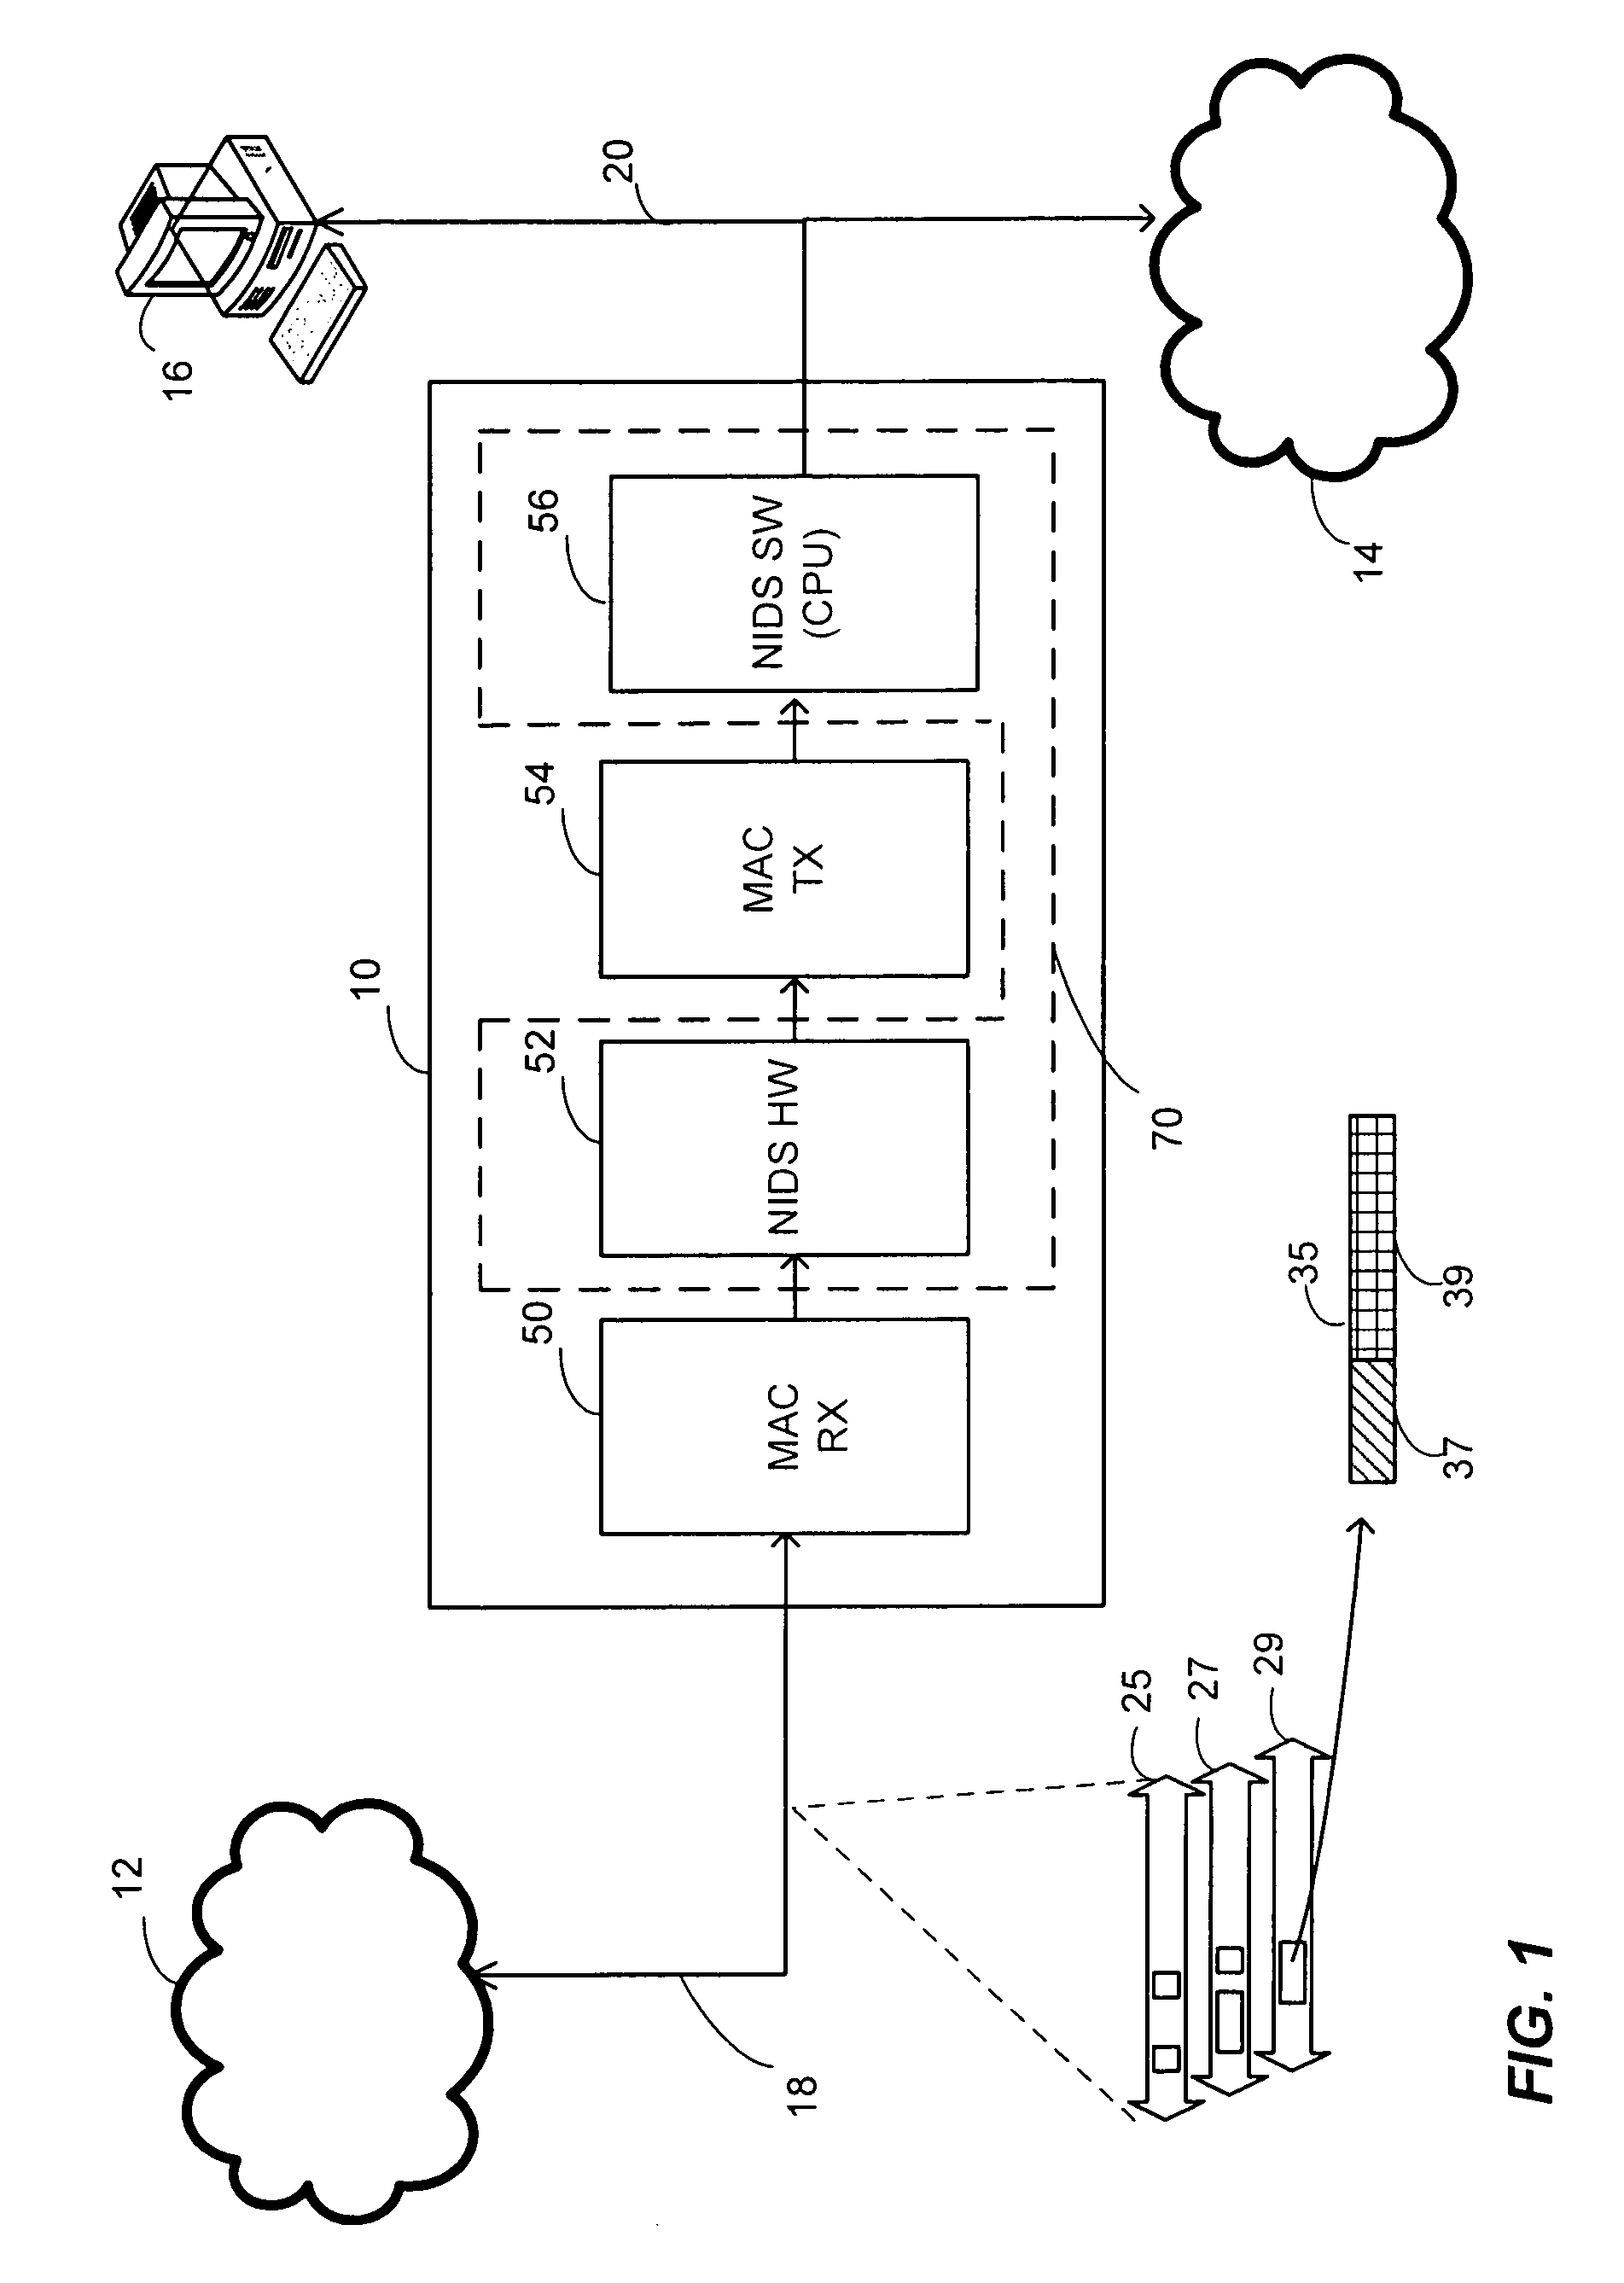 Method and Apparatus for Deep Packet Inspection for Network Intrusion Detection